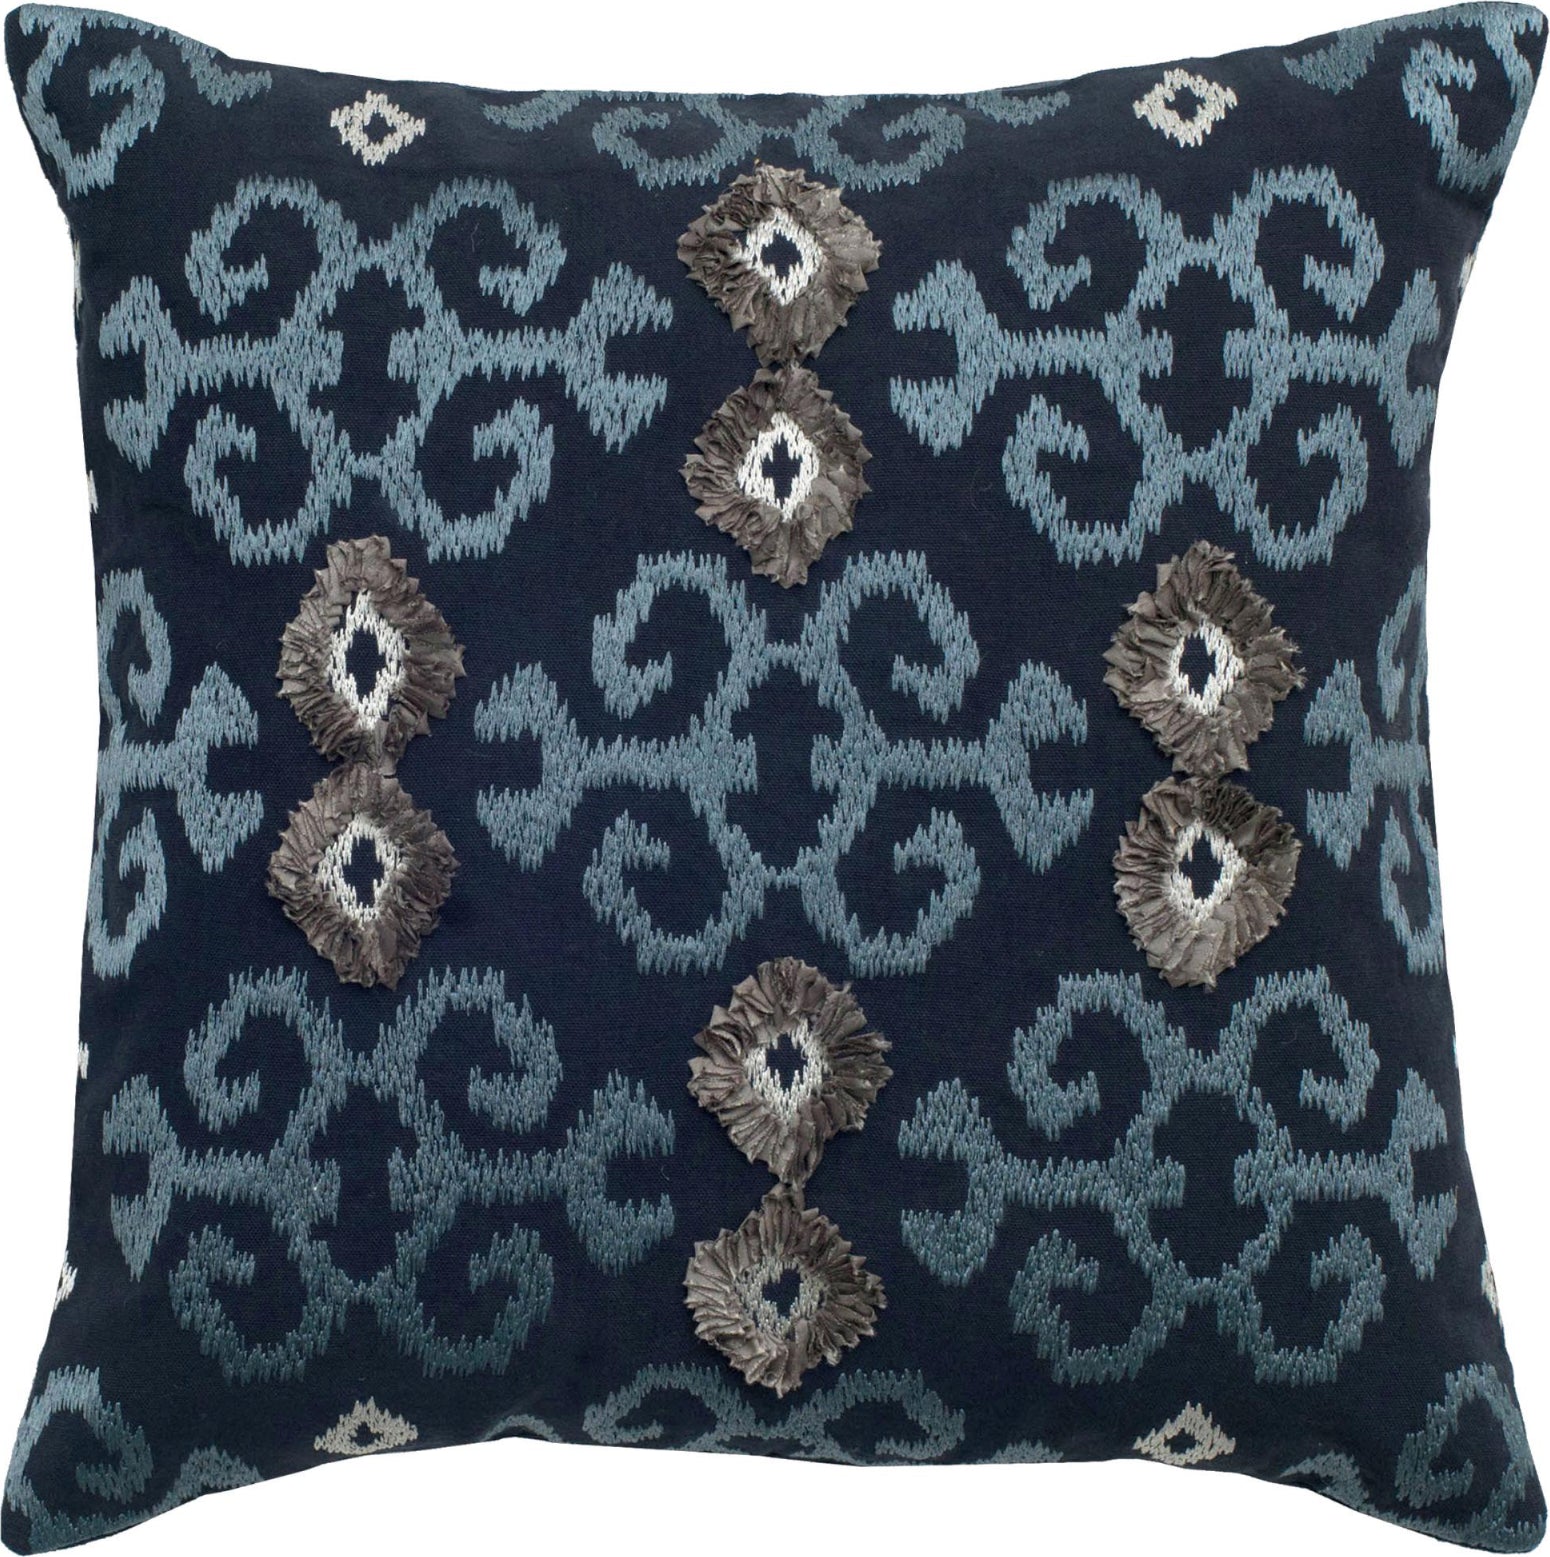 Rizzy Pillows TRS033 Blue